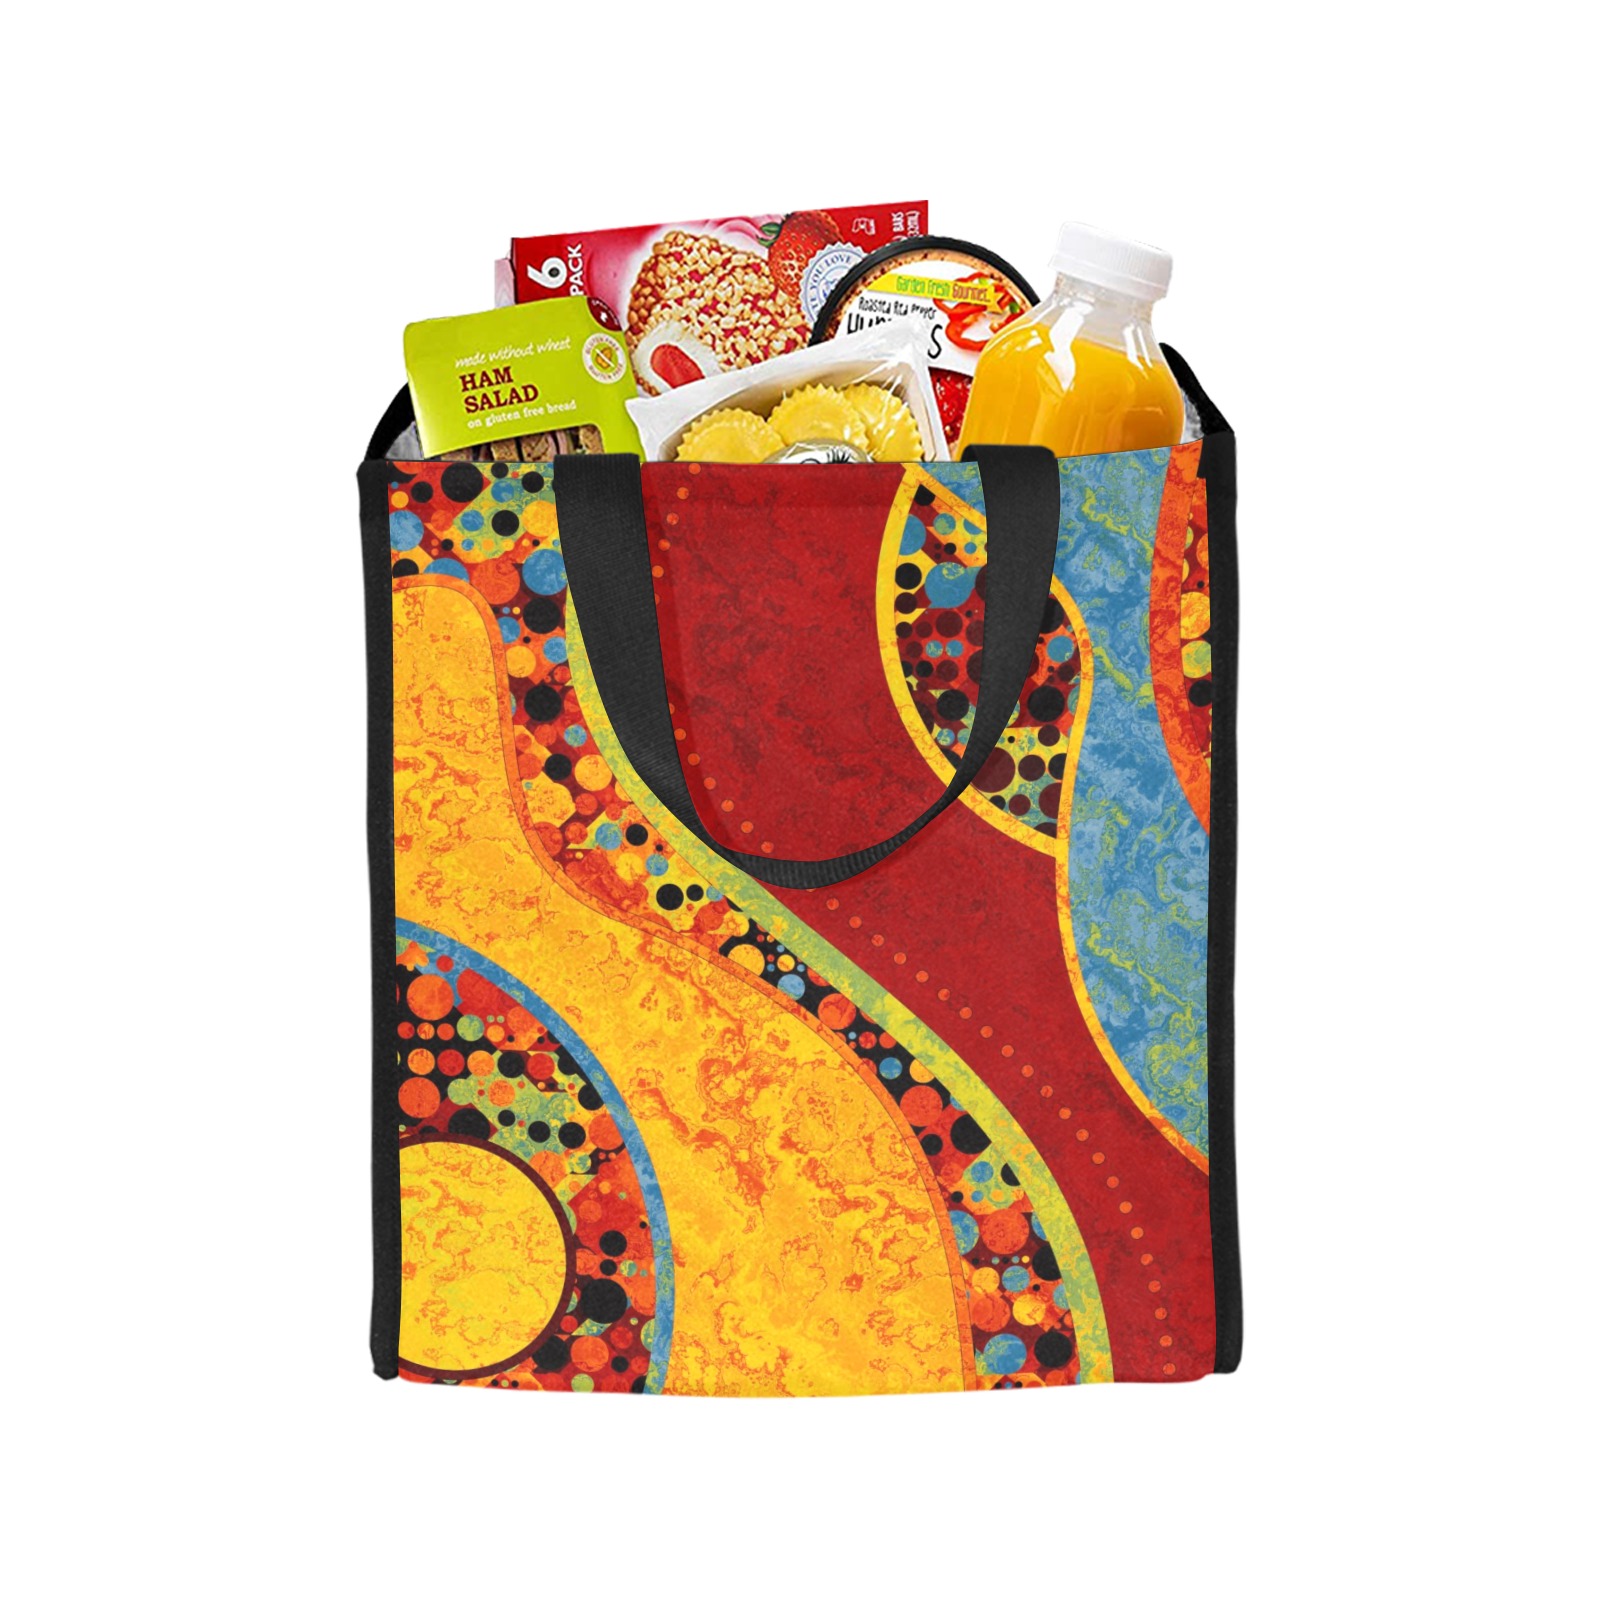 Abstract Pattern Mix - Dots And Colors 4 Picnic Tote Bag (Model 1717)